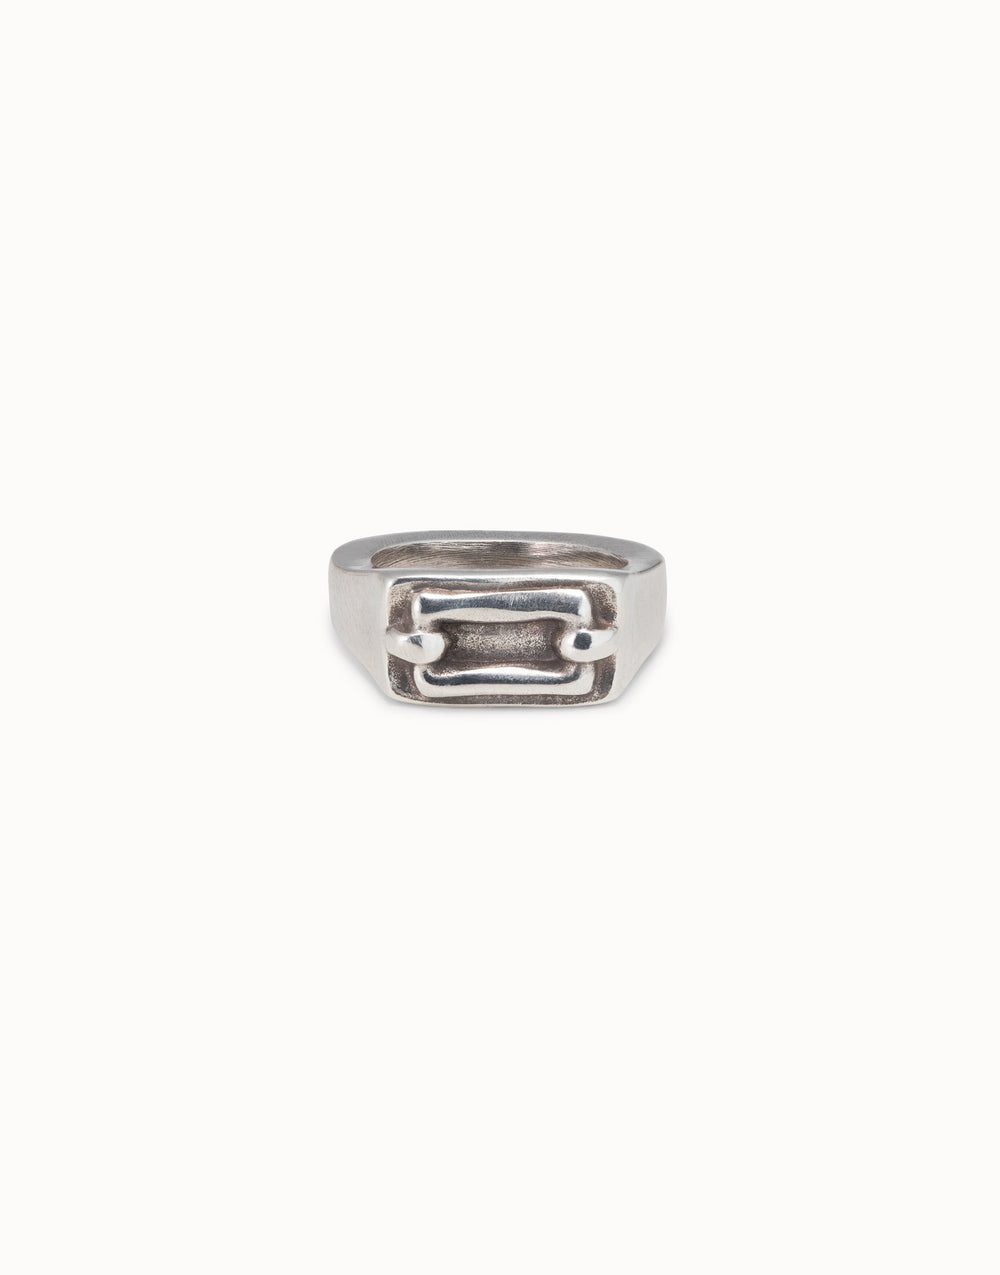 DANDY RINGS-SILVER - Kingfisher Road - Online Boutique